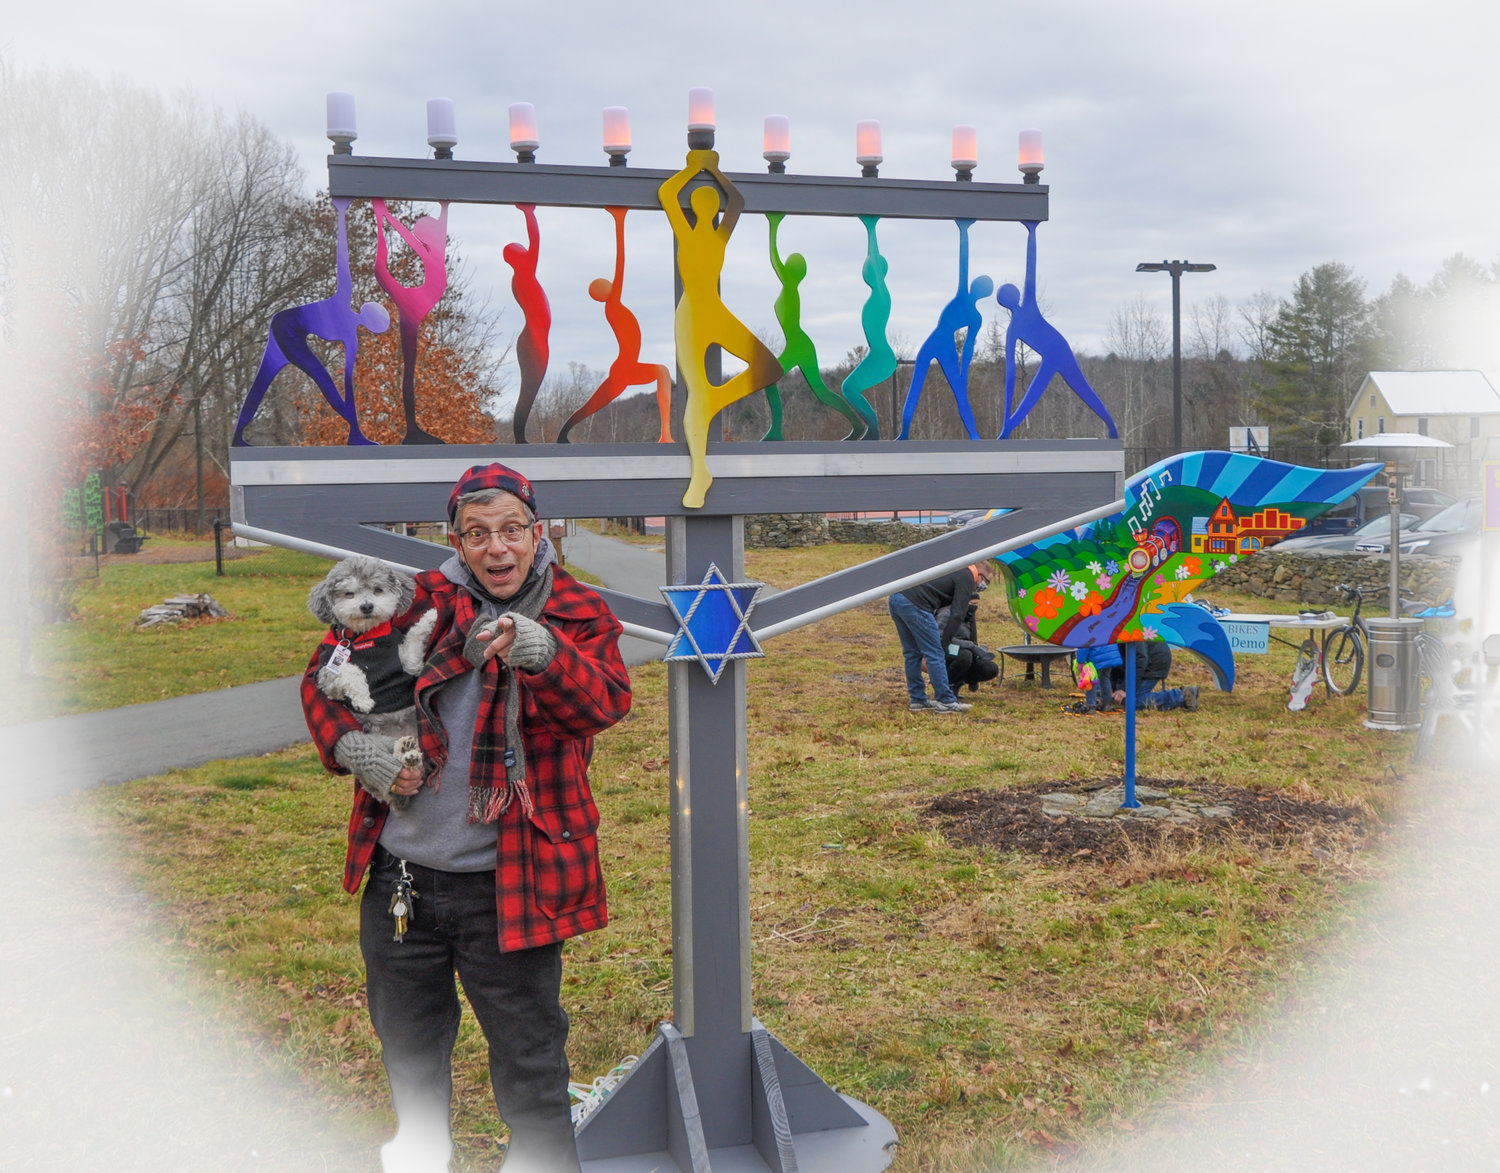 My visit to the town-wide Holiday in Hurleyville celebration last weekend included a stop to admire artist Charley Jordan Gips' beautiful new menorah installation...